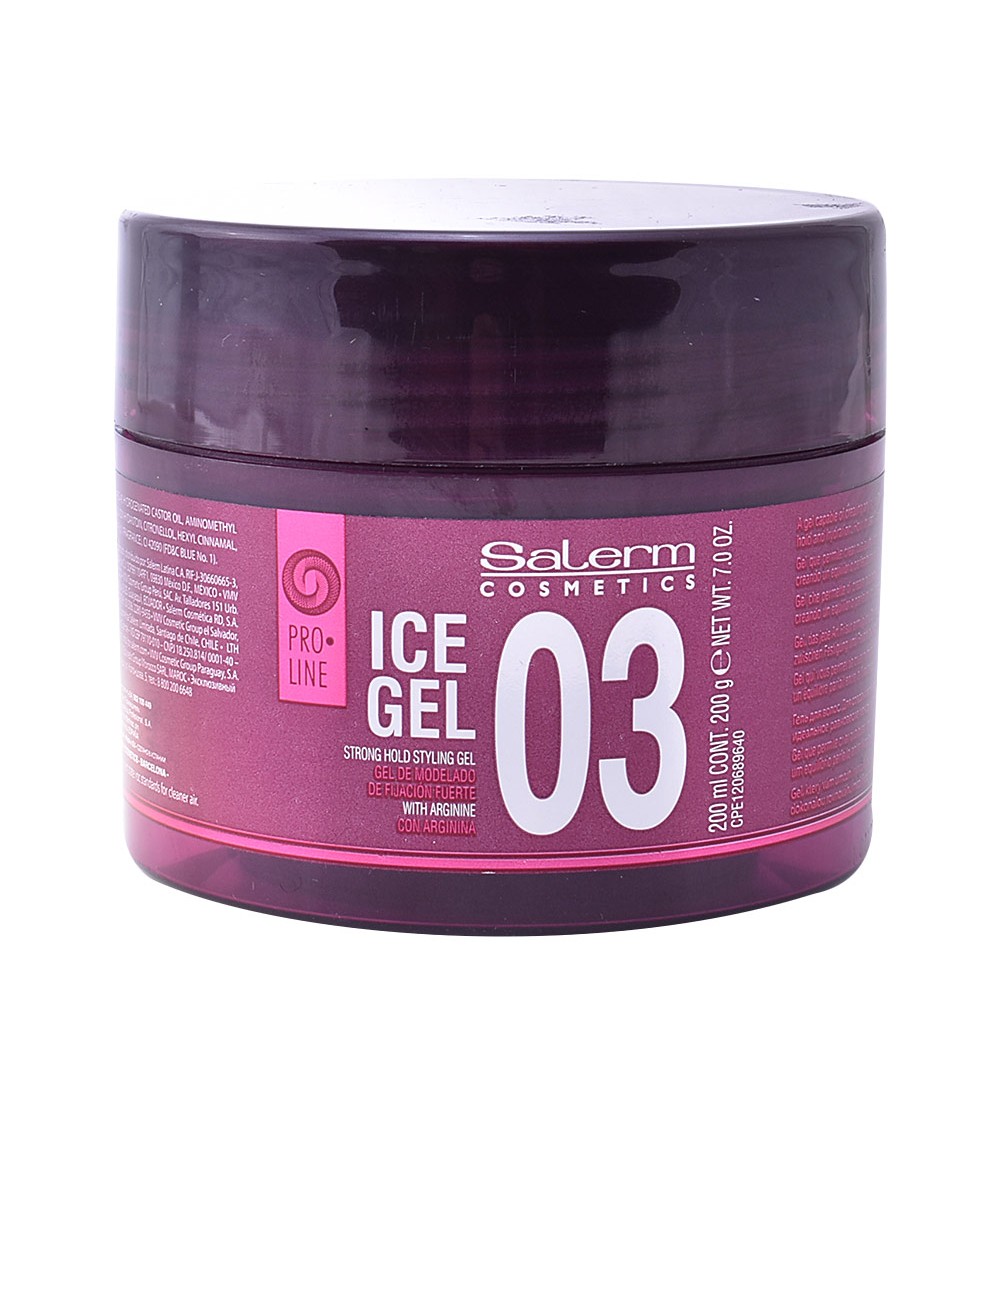 ICE gel 03 strong hold styling gel 200 ml